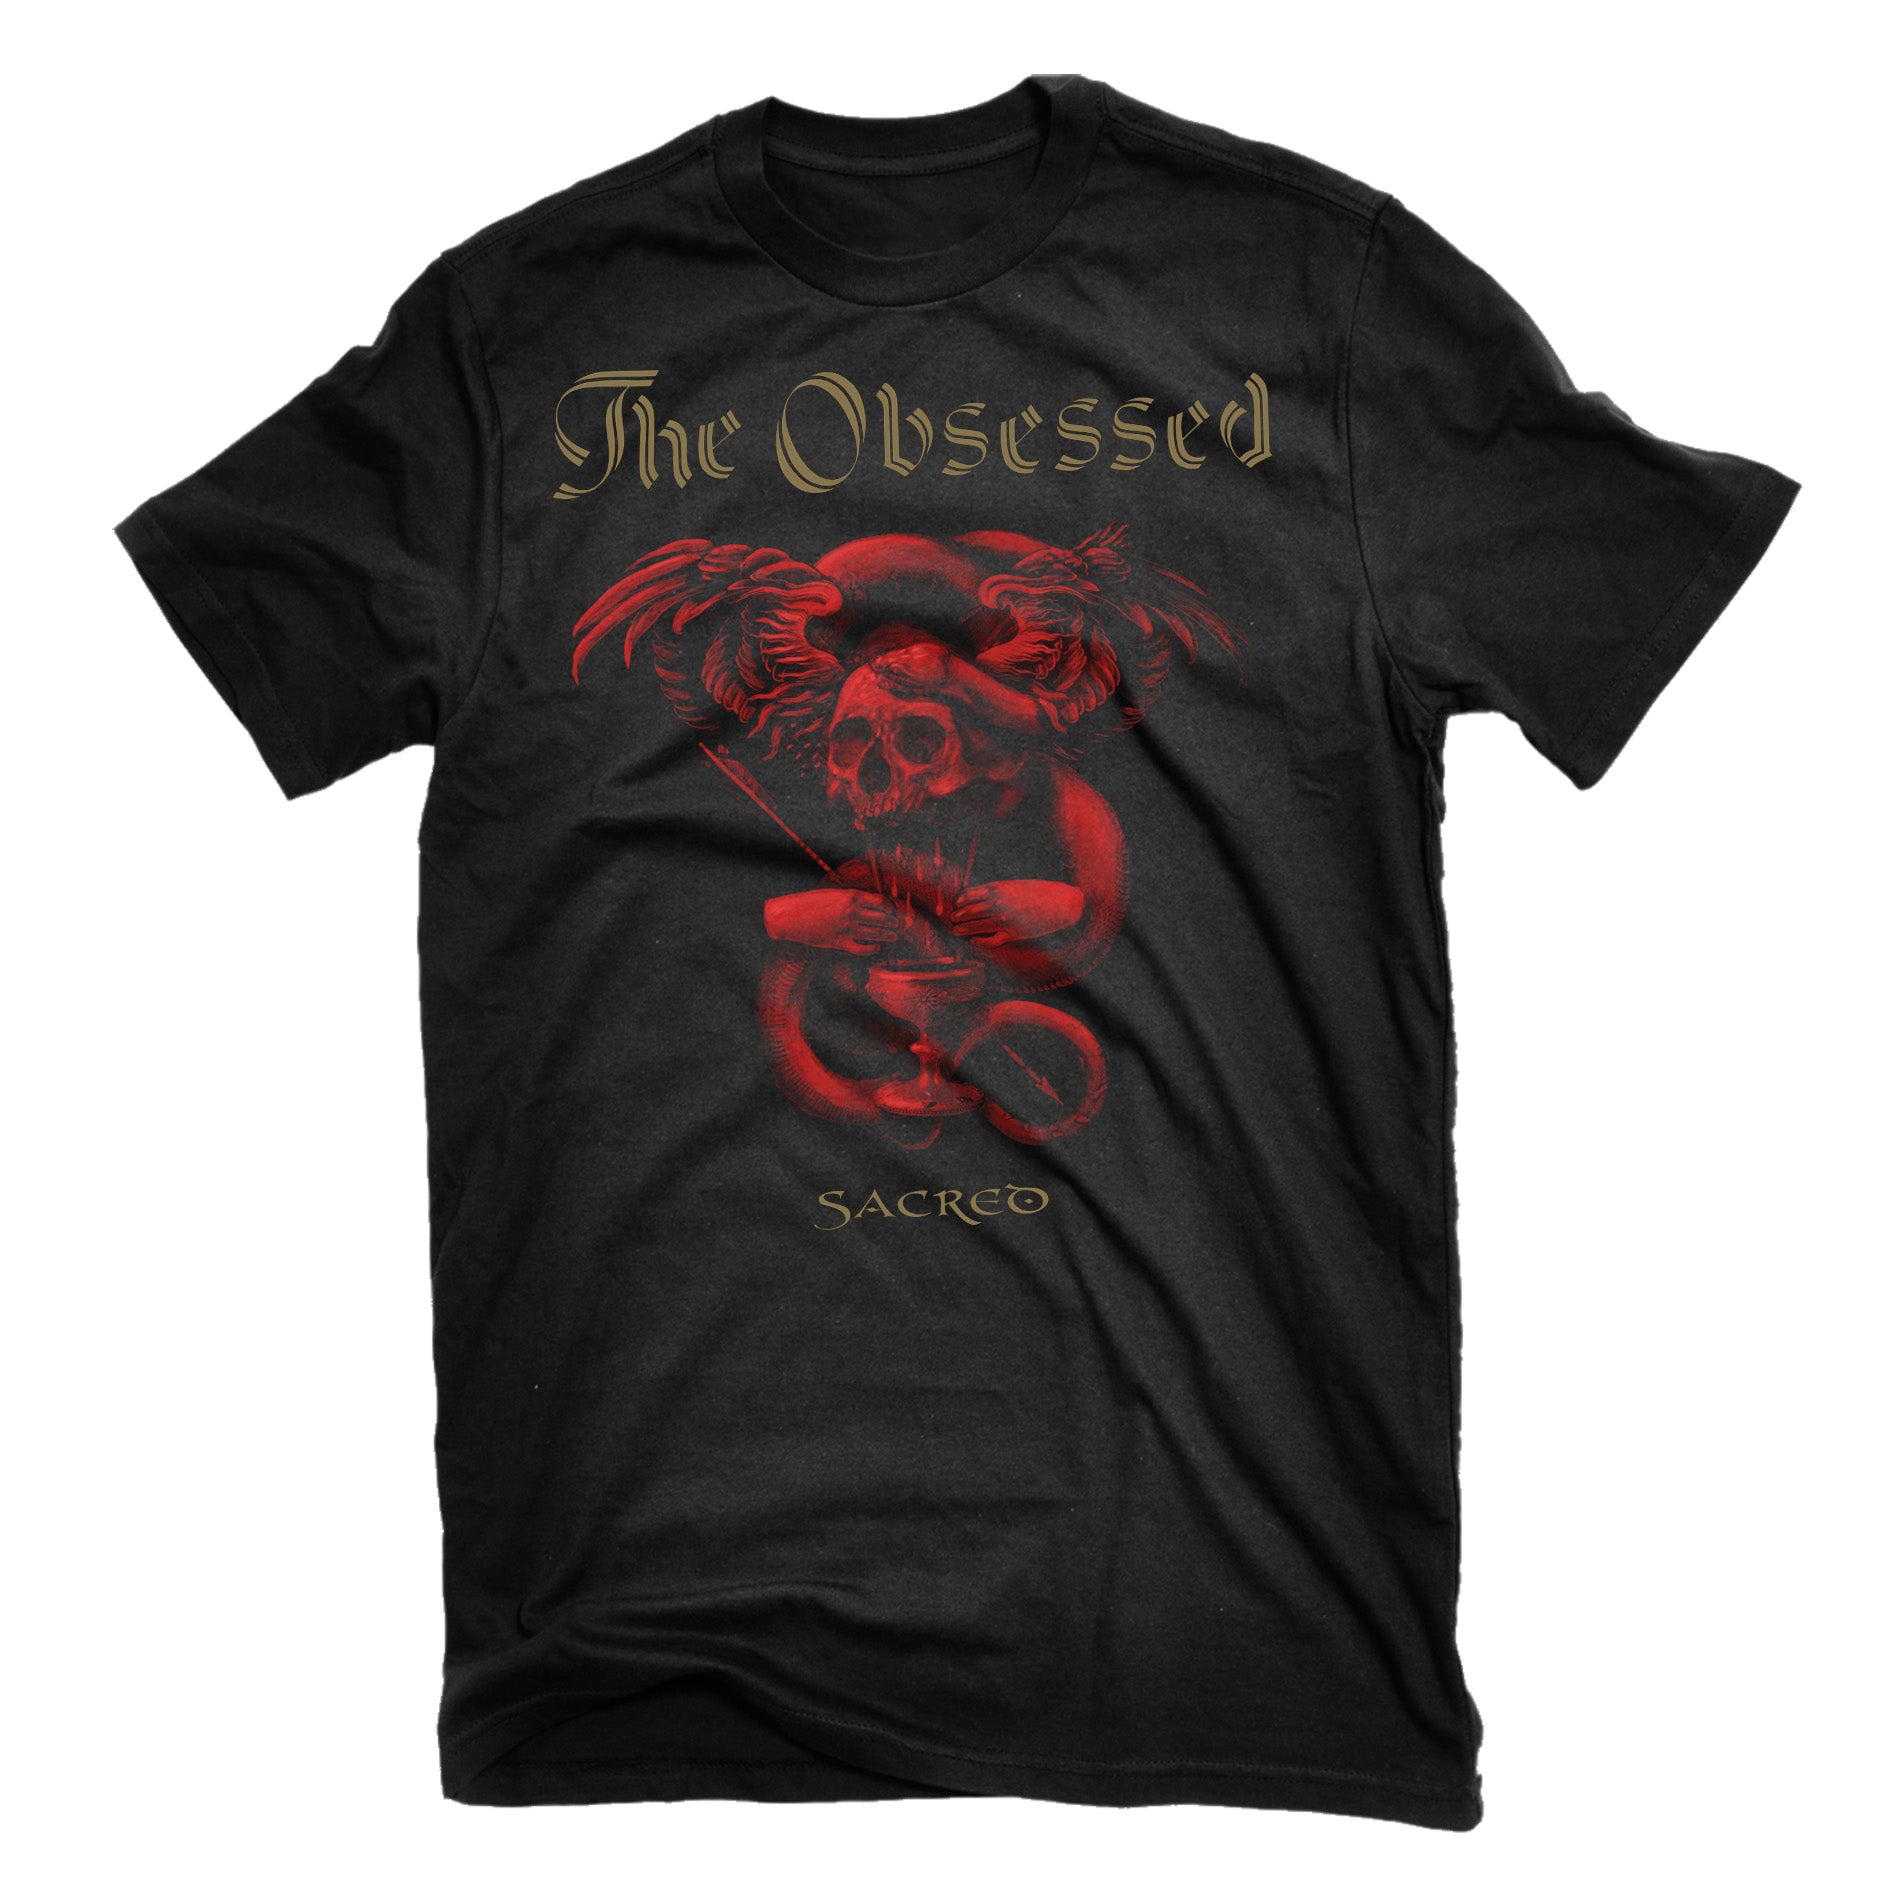 The Obsessed "Sacred" T-Shirt